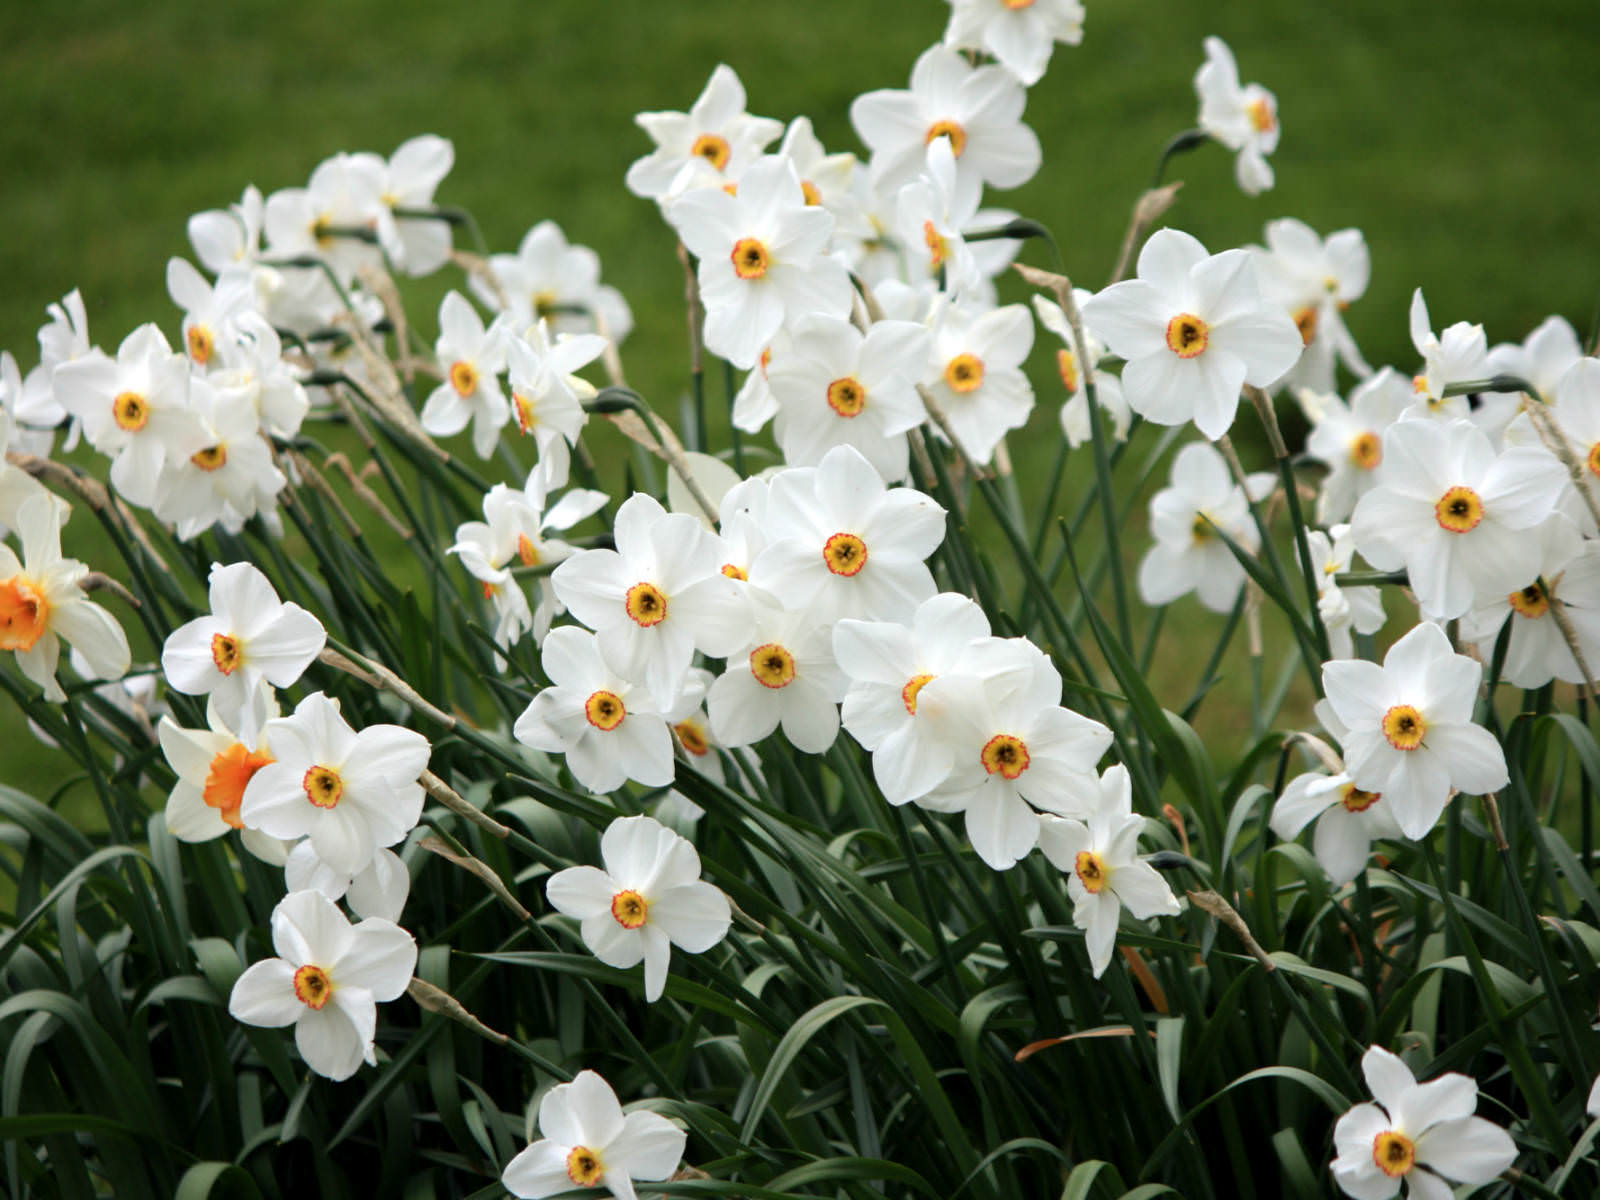 Narcissus poeticus - Poet's Narcissus | World of Flowering Plants